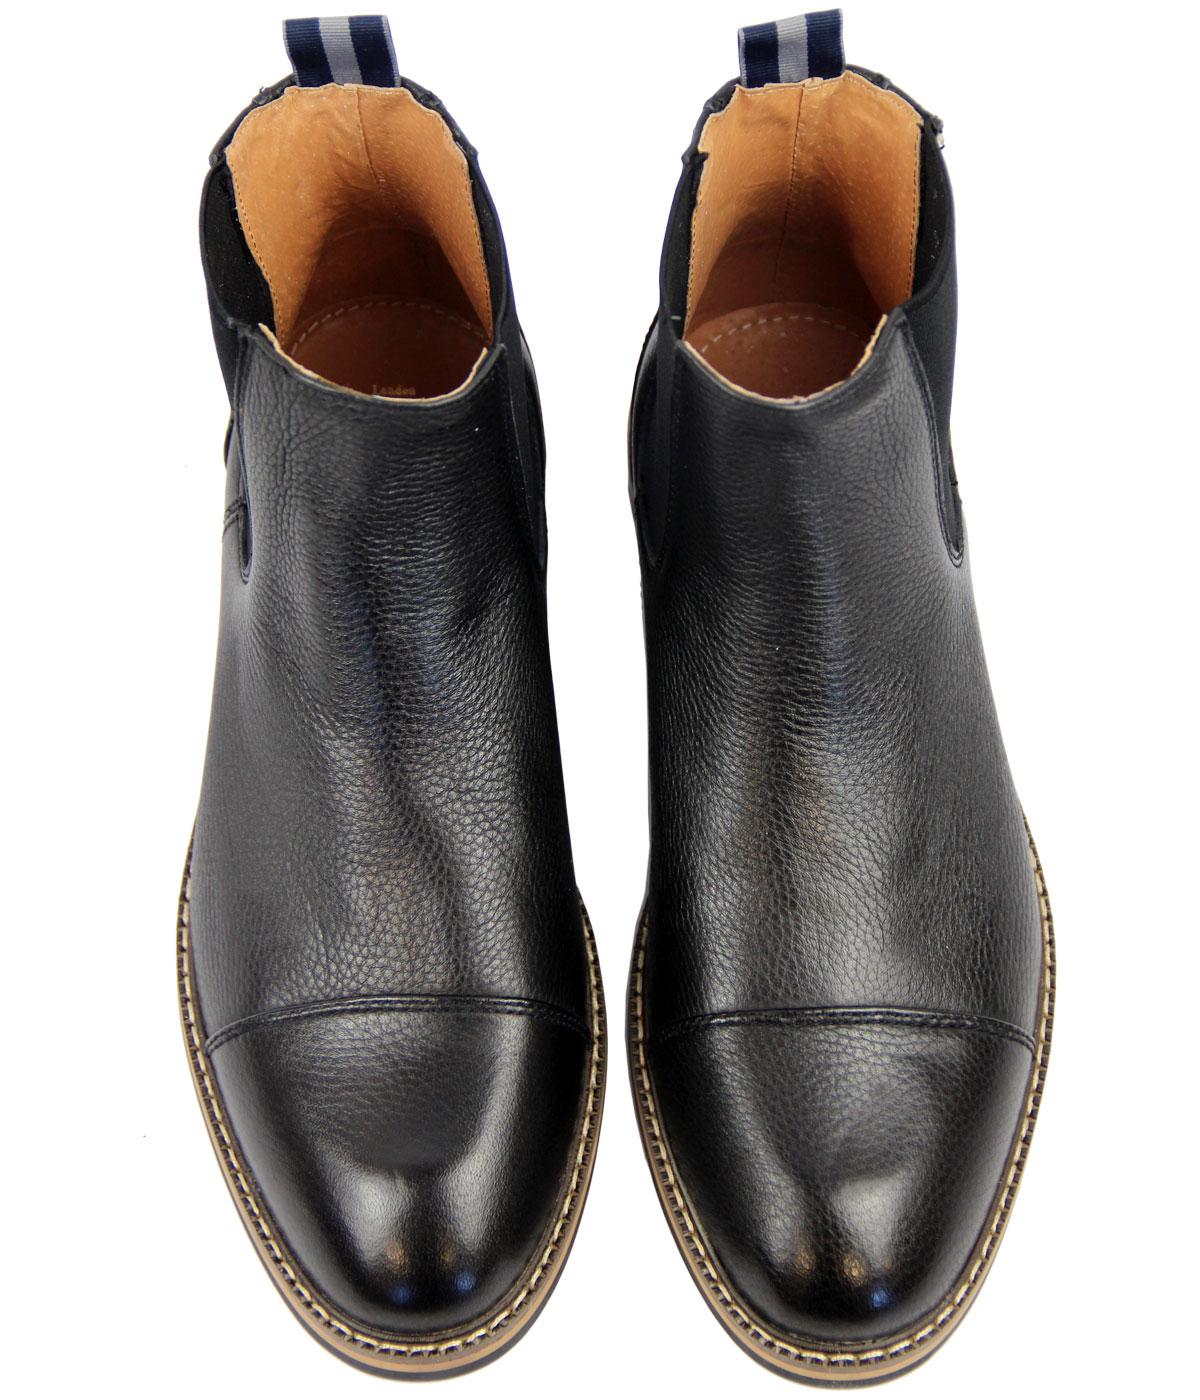 PETER WERTH Turnmill Retro Mod Toe Cap Leather Chelsea Boots